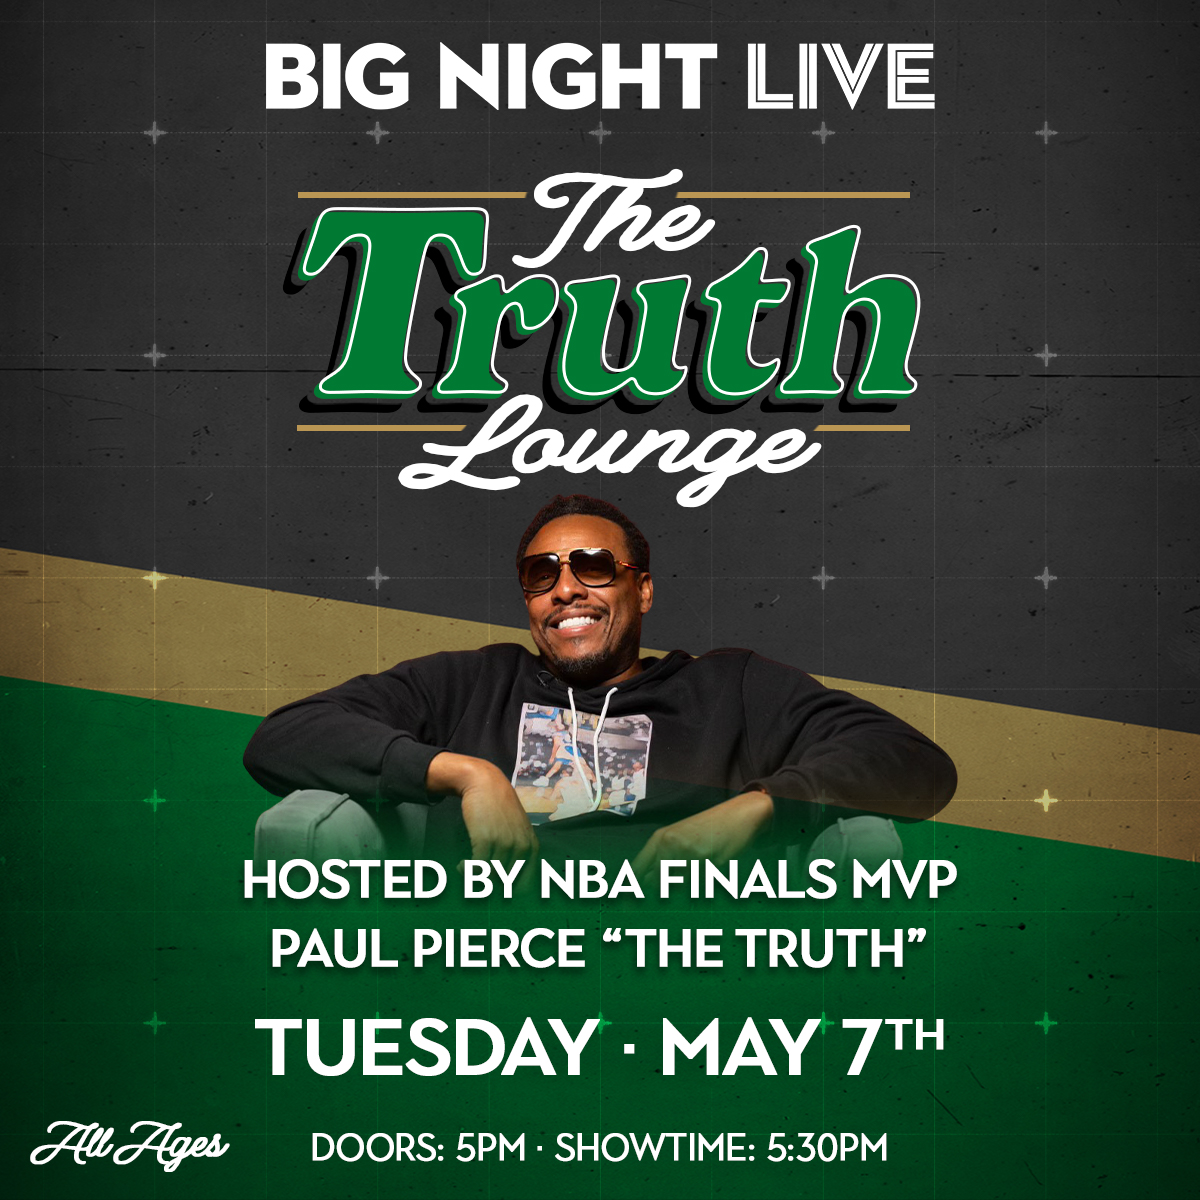 The Truth is coming to town 👀 Come see @paulpierce34 at @bignightlive next week for a live show of The Truth Lounge: bit.ly/4a62jc3